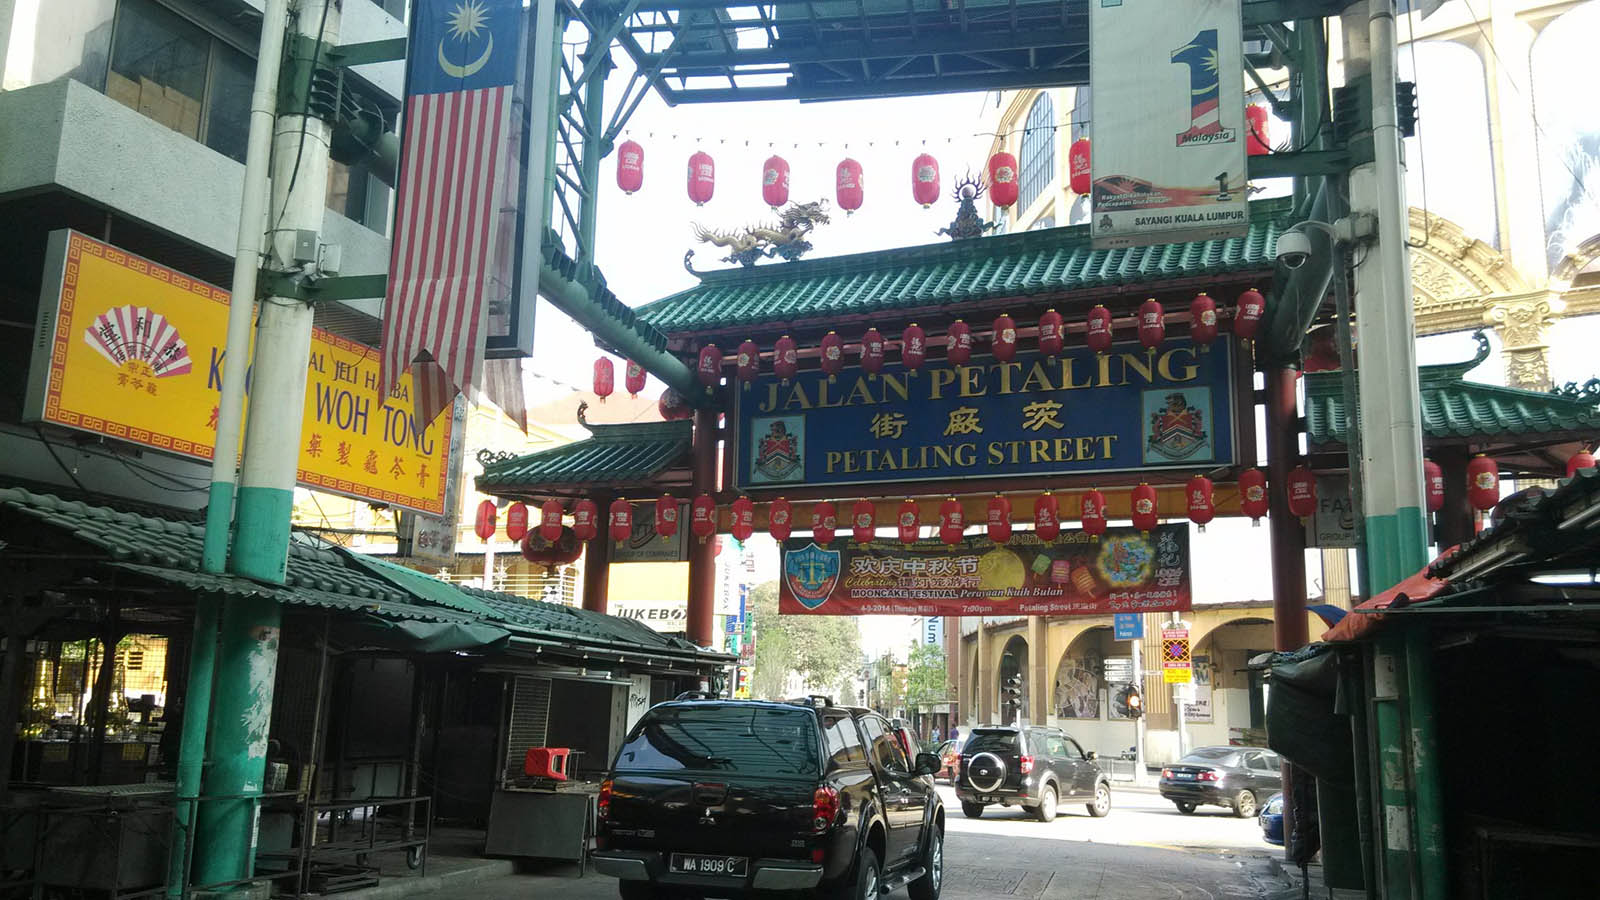 Petaling Street Chinatown Shop For Anything From Gems And Incense To Toys And T Shirts Klia2 Info